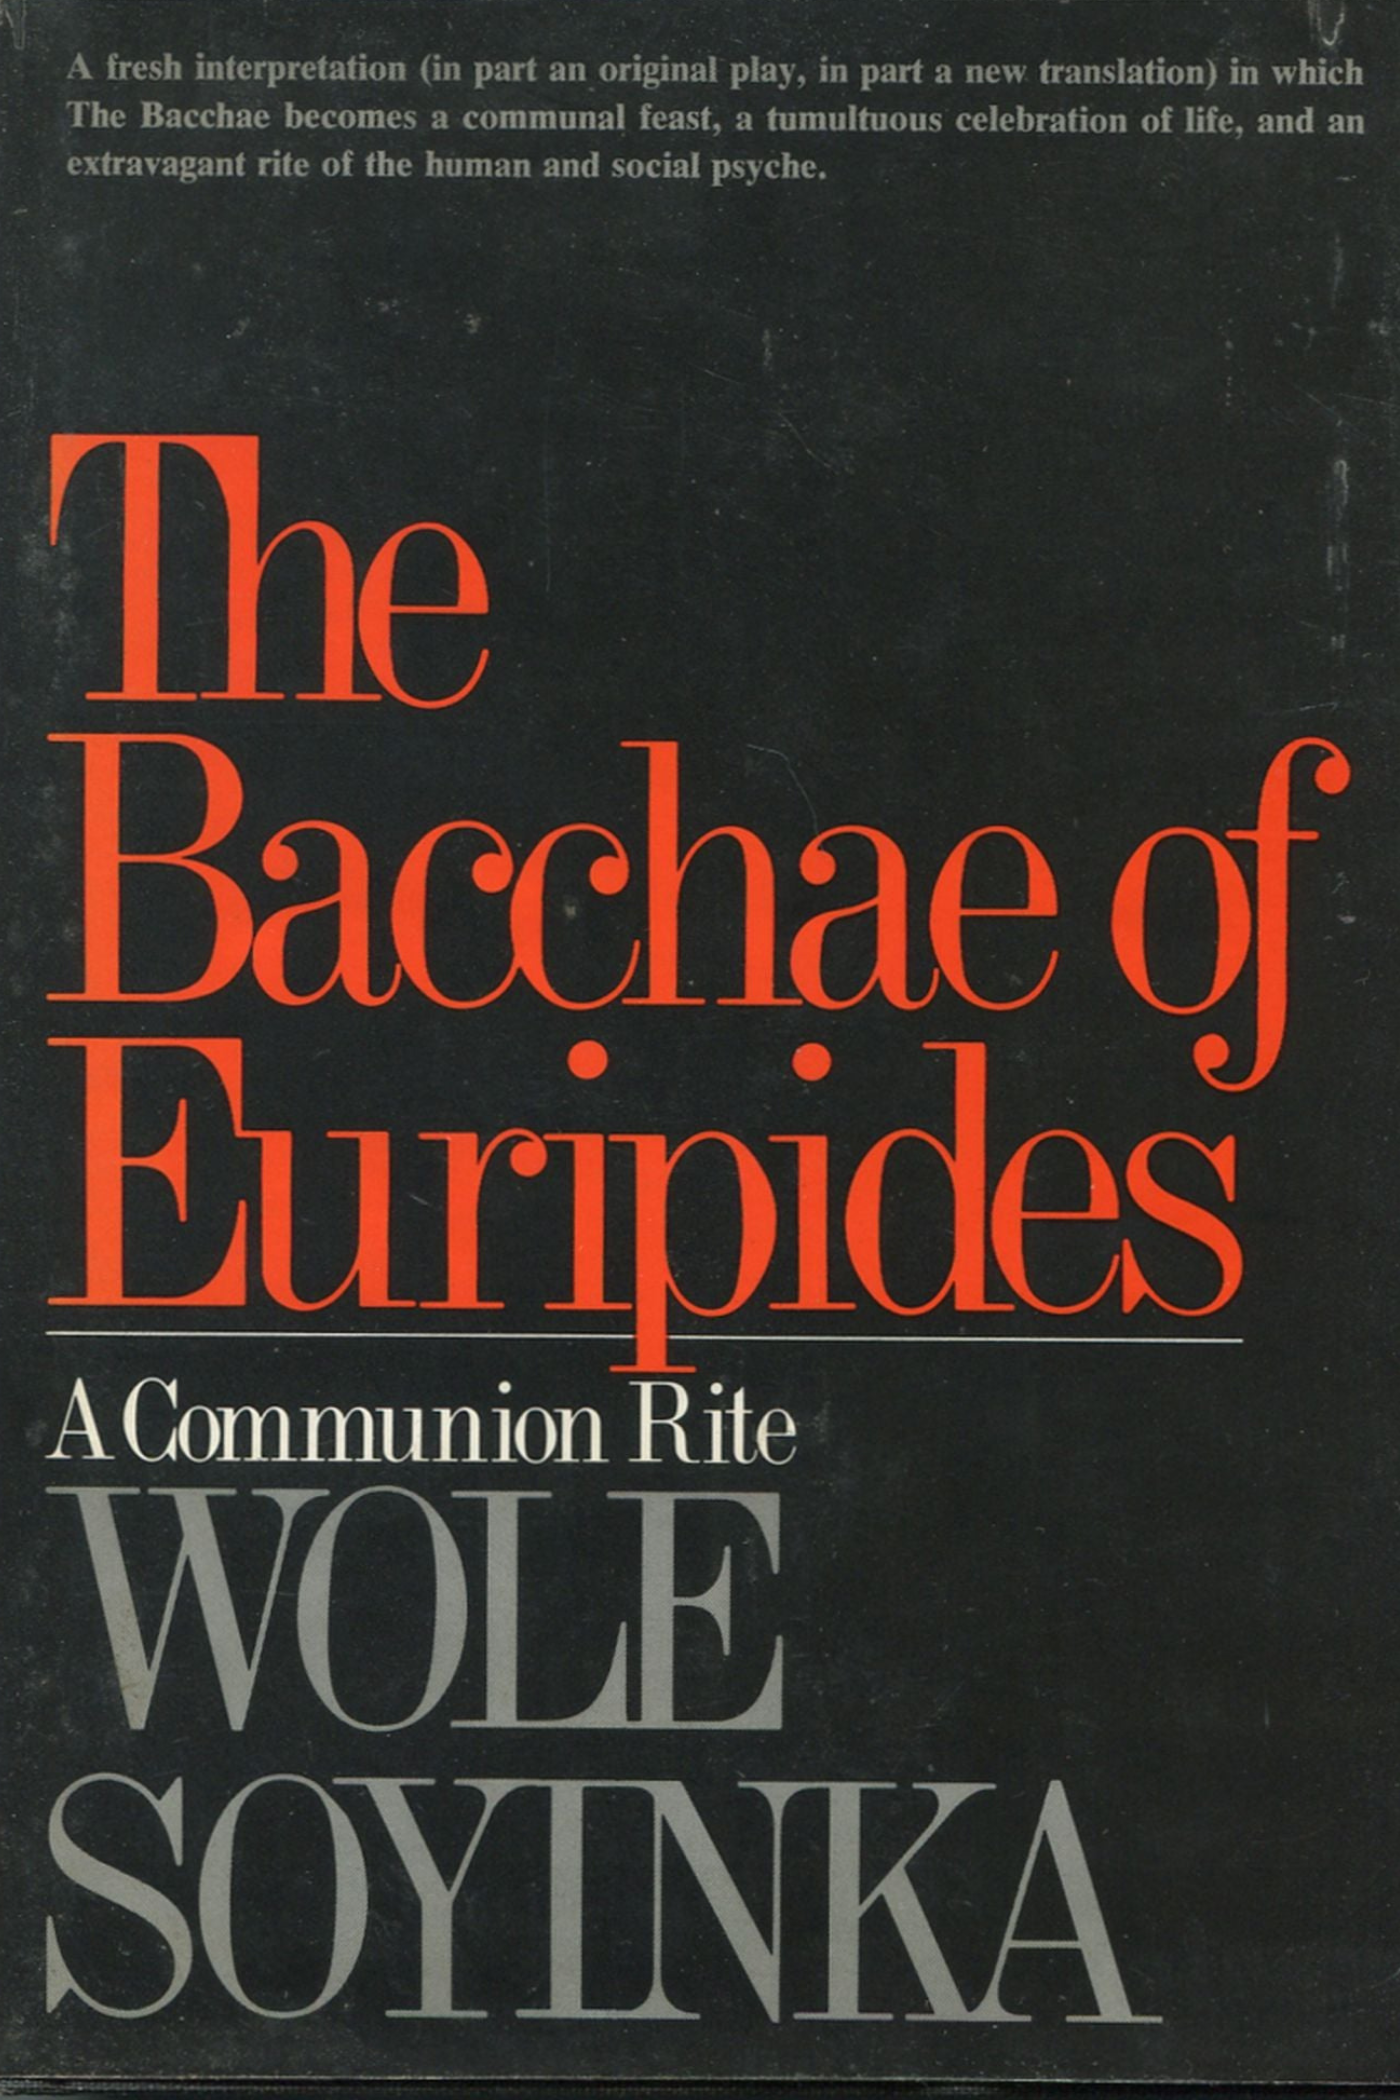 Wole Soyinka, The Bacchae of Euripides Poster.png